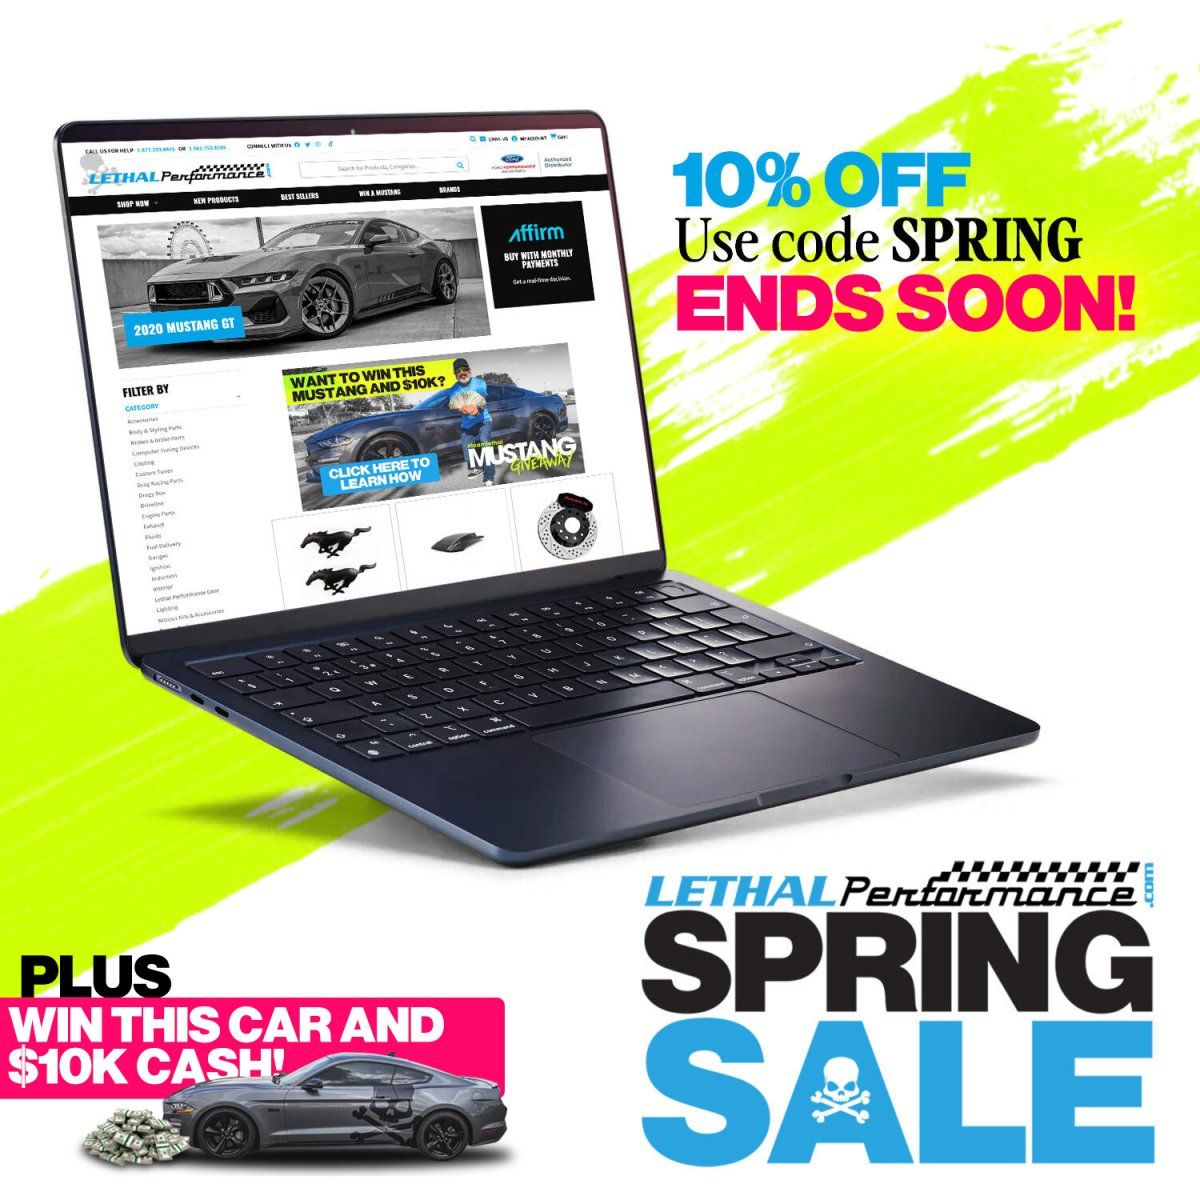 sitewide 10% ends soon + car.jpeg